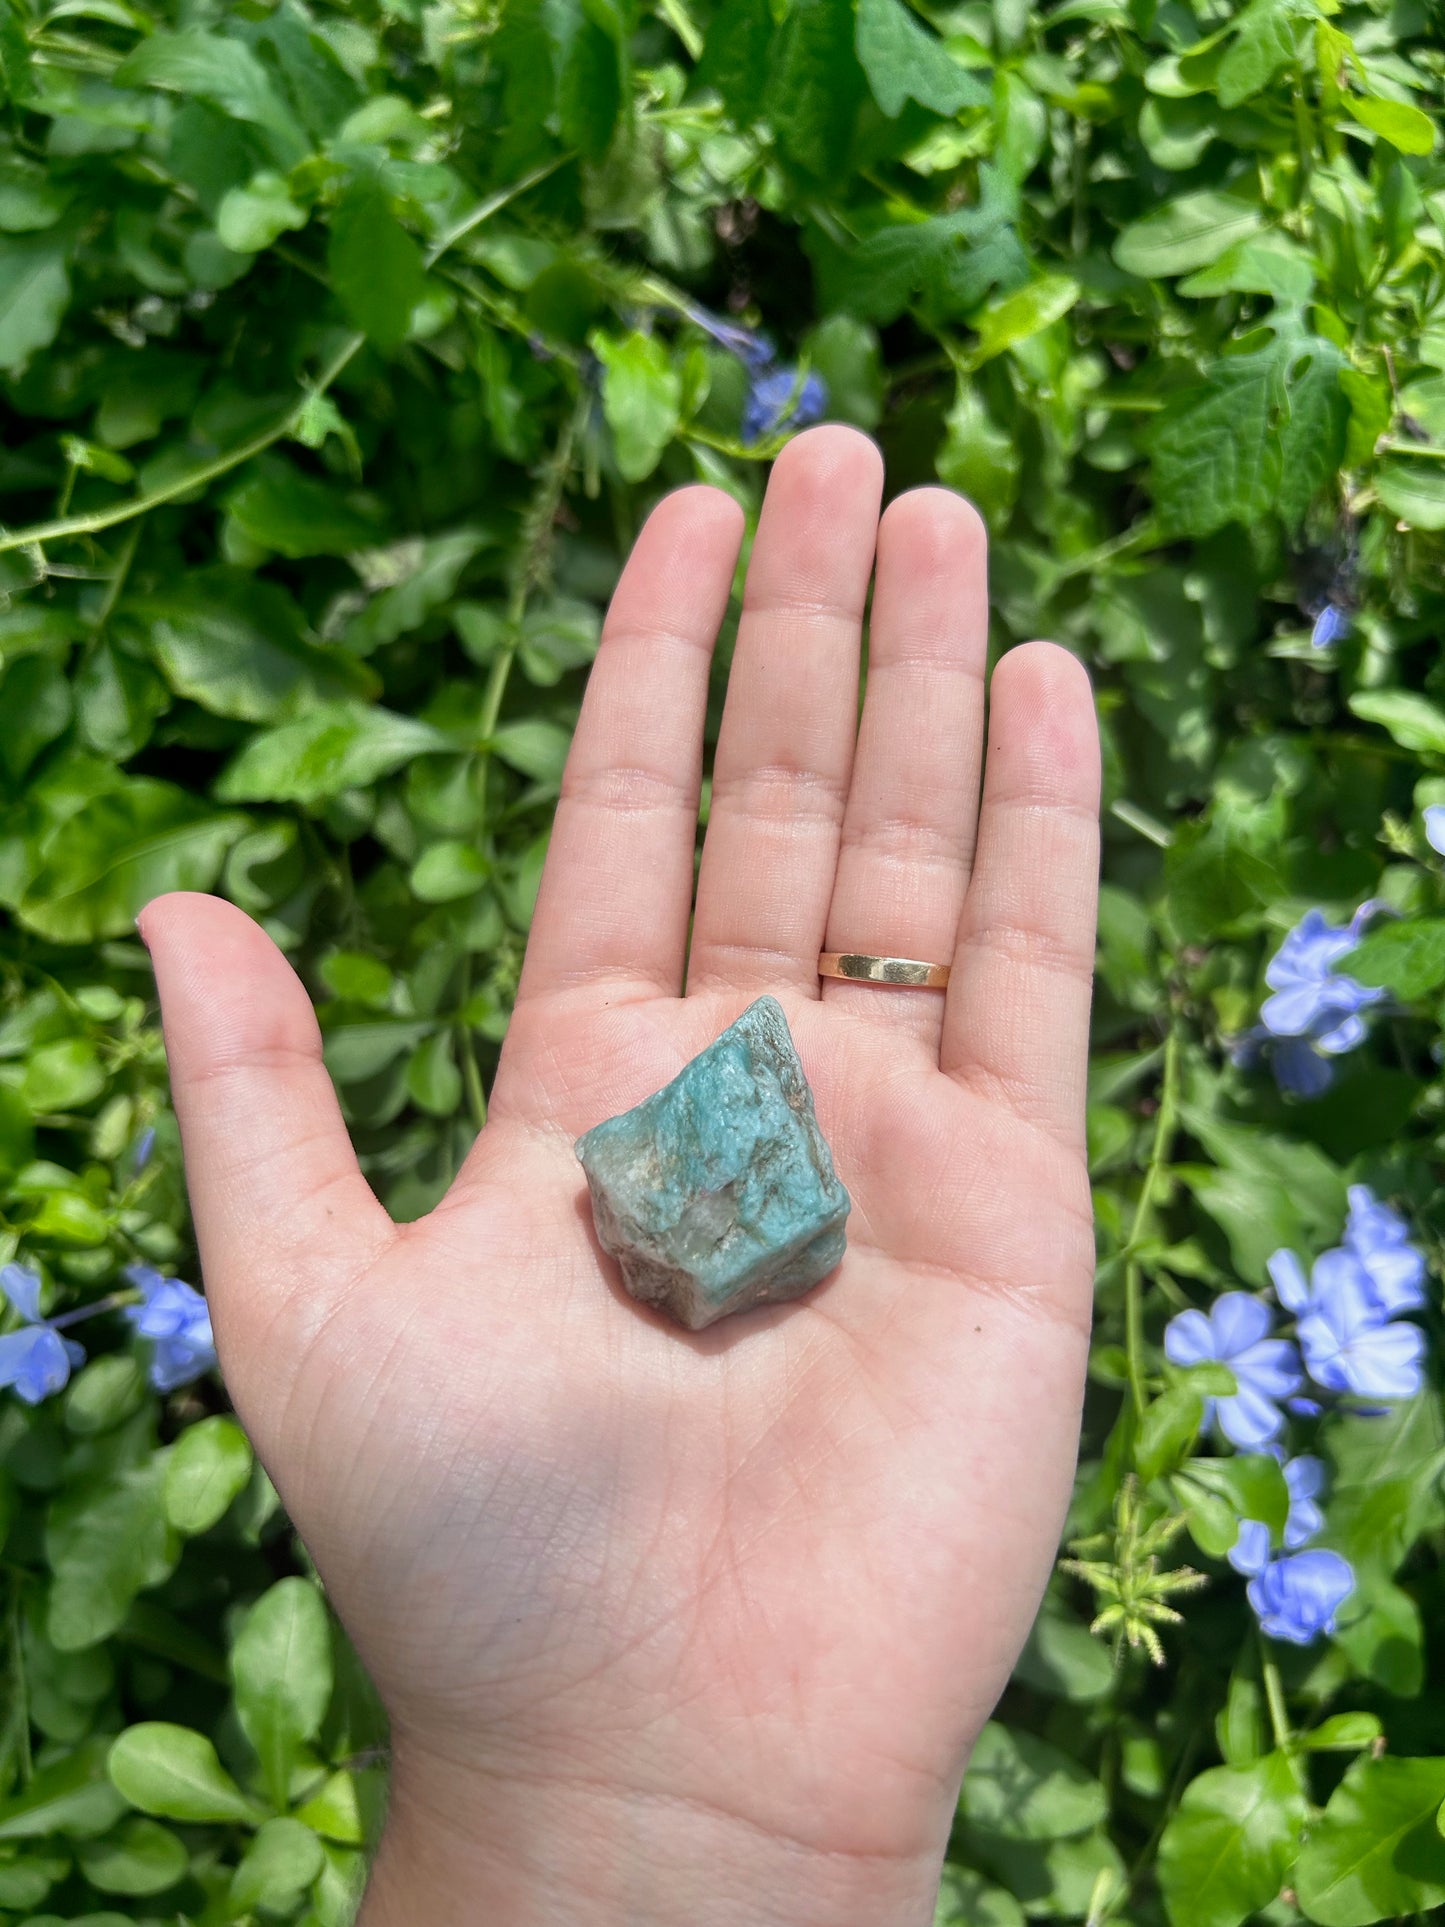 Amazonite stone 0.8 oz- picture taken outside with the stone in a hand. the background is leaves and blue flowers.